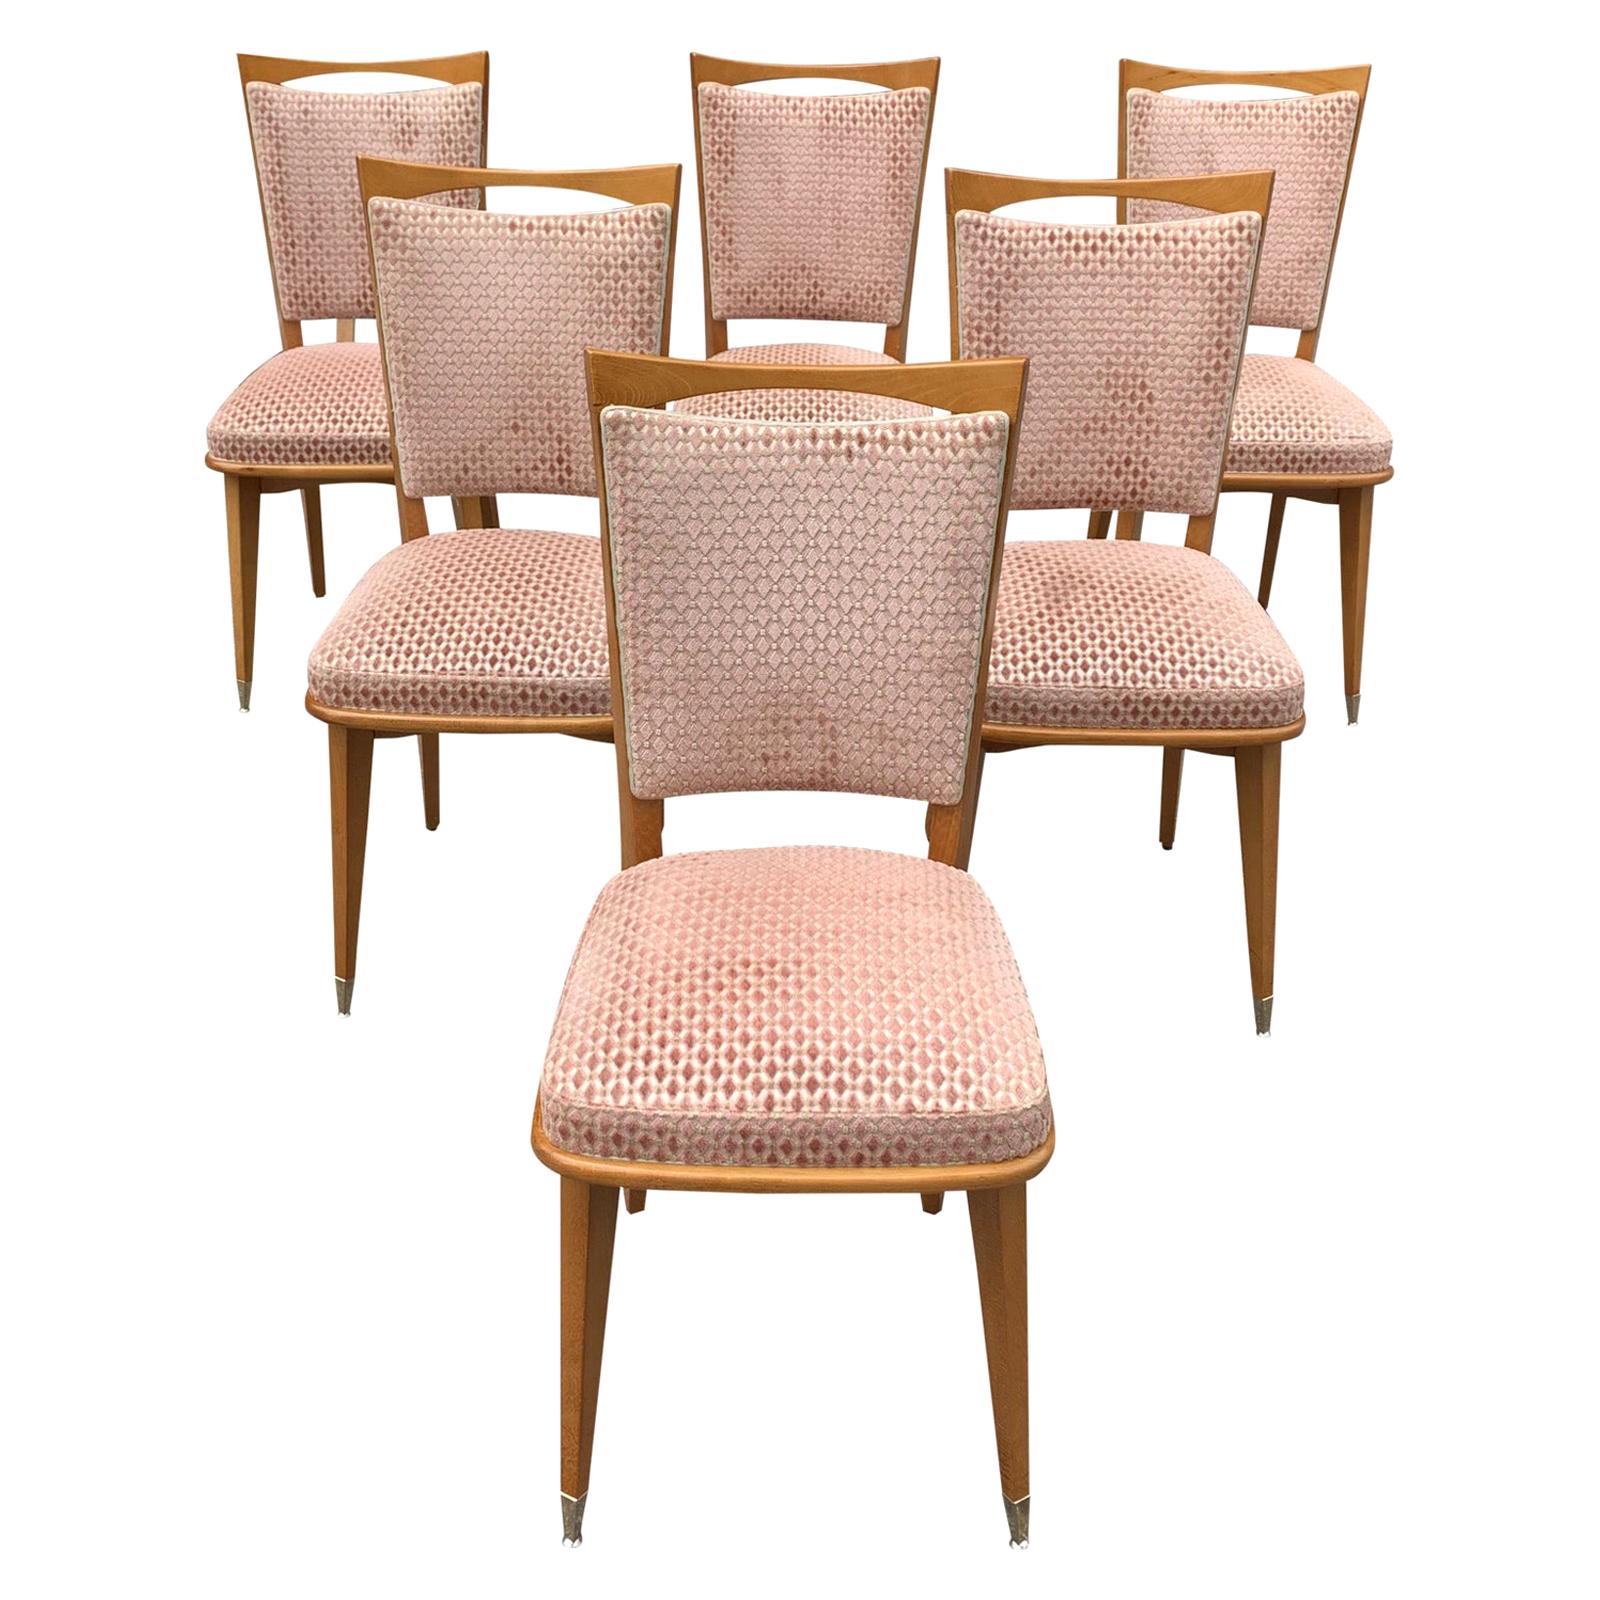 Set of 6 Vintage French Art Deco Solid Mahogany Dining Chairs, 1940s For Sale